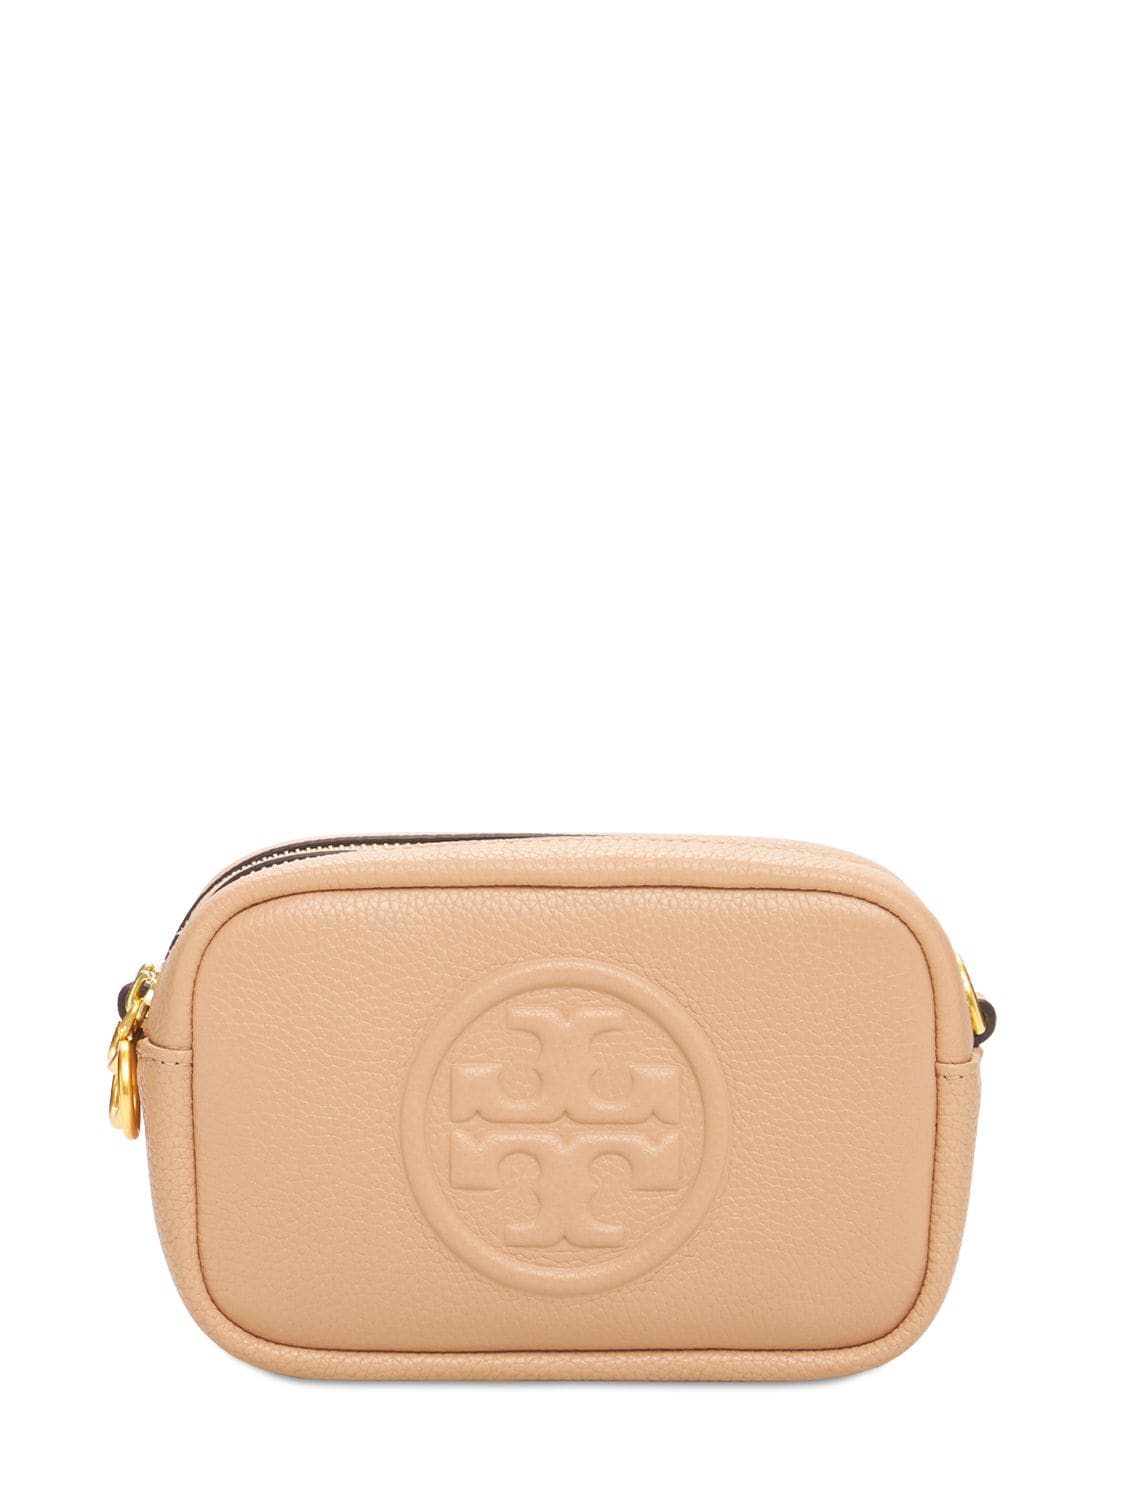 TORY BURCH PERRY BOMBE LEATHER CAMERA BAG,74IL4W015-MJG40